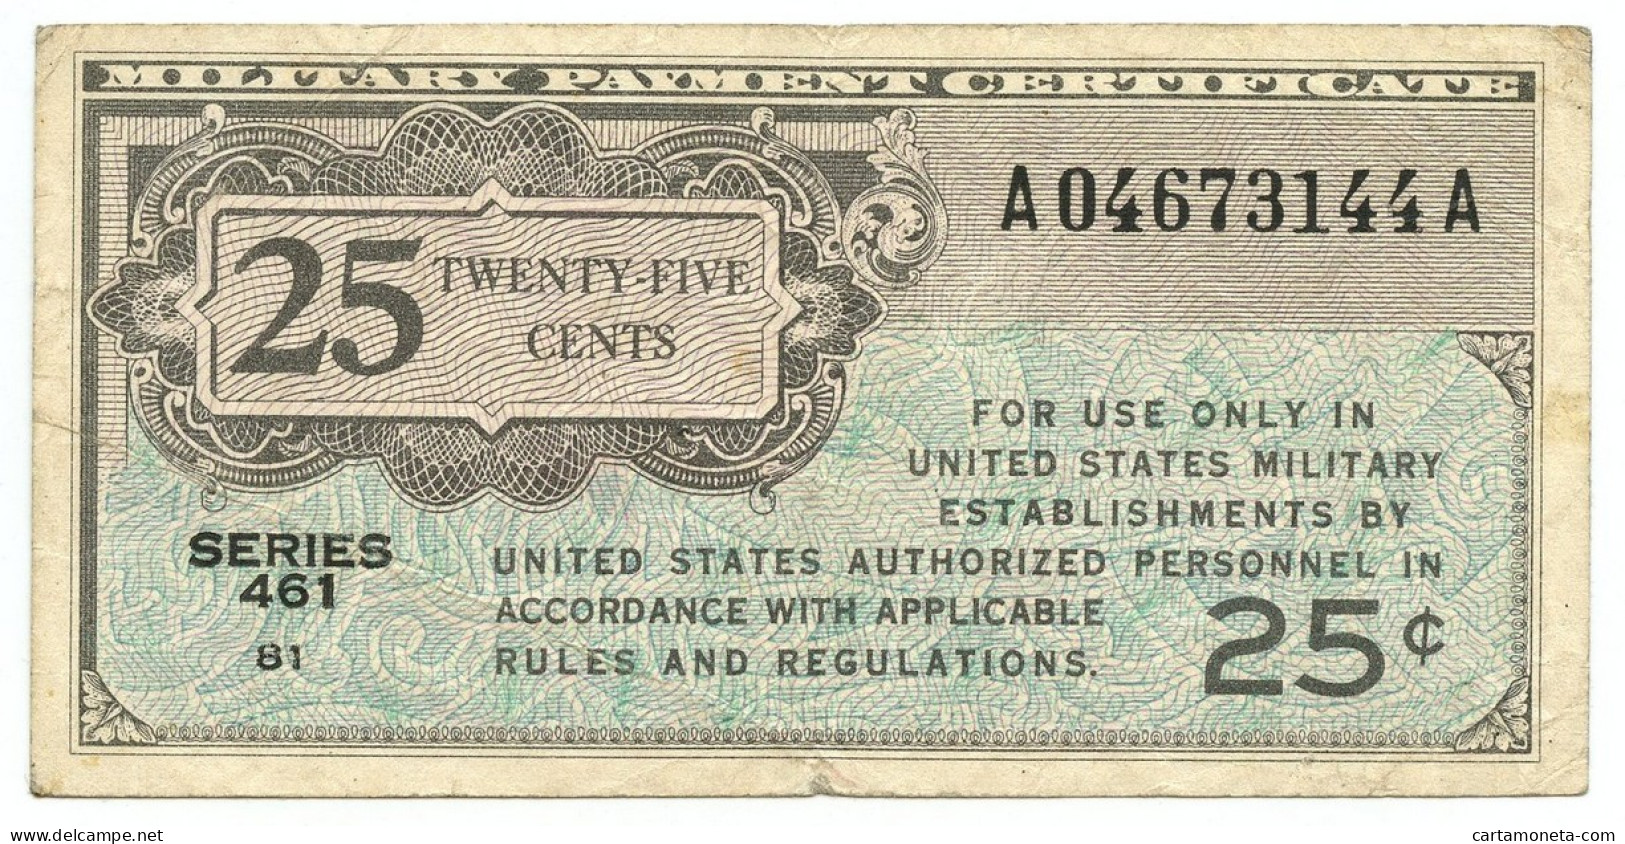 25 CENTS MILITARY PAYMENT CERTIFICATE SERIES 461 UNITED STATES 17/09/1946 BB- - Occupazione Alleata Seconda Guerra Mondiale